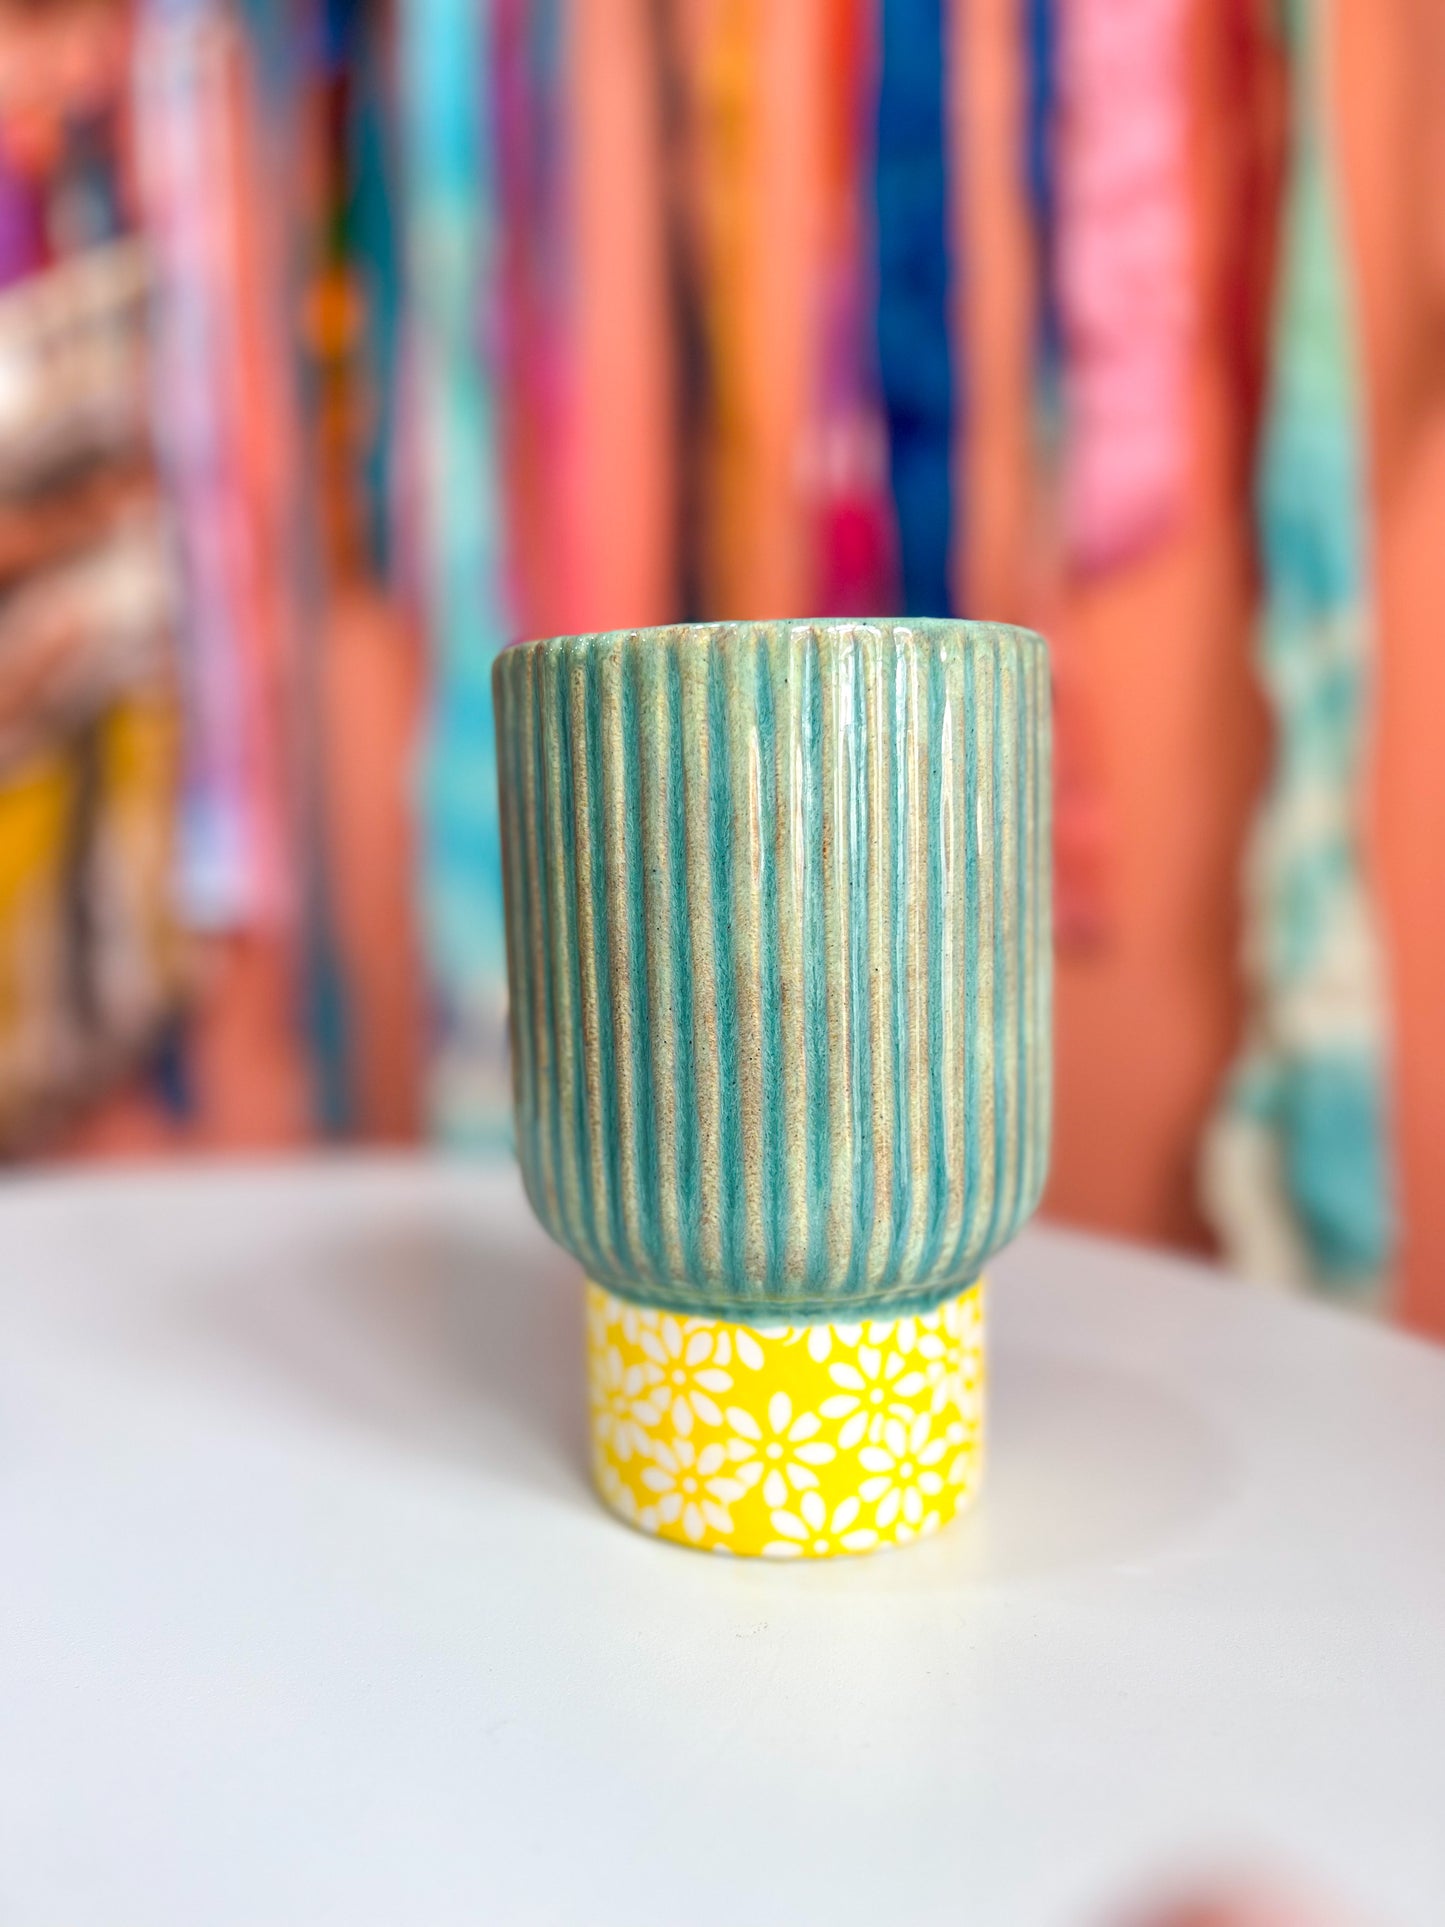 Retro Cocktail Cup - yellow daisy